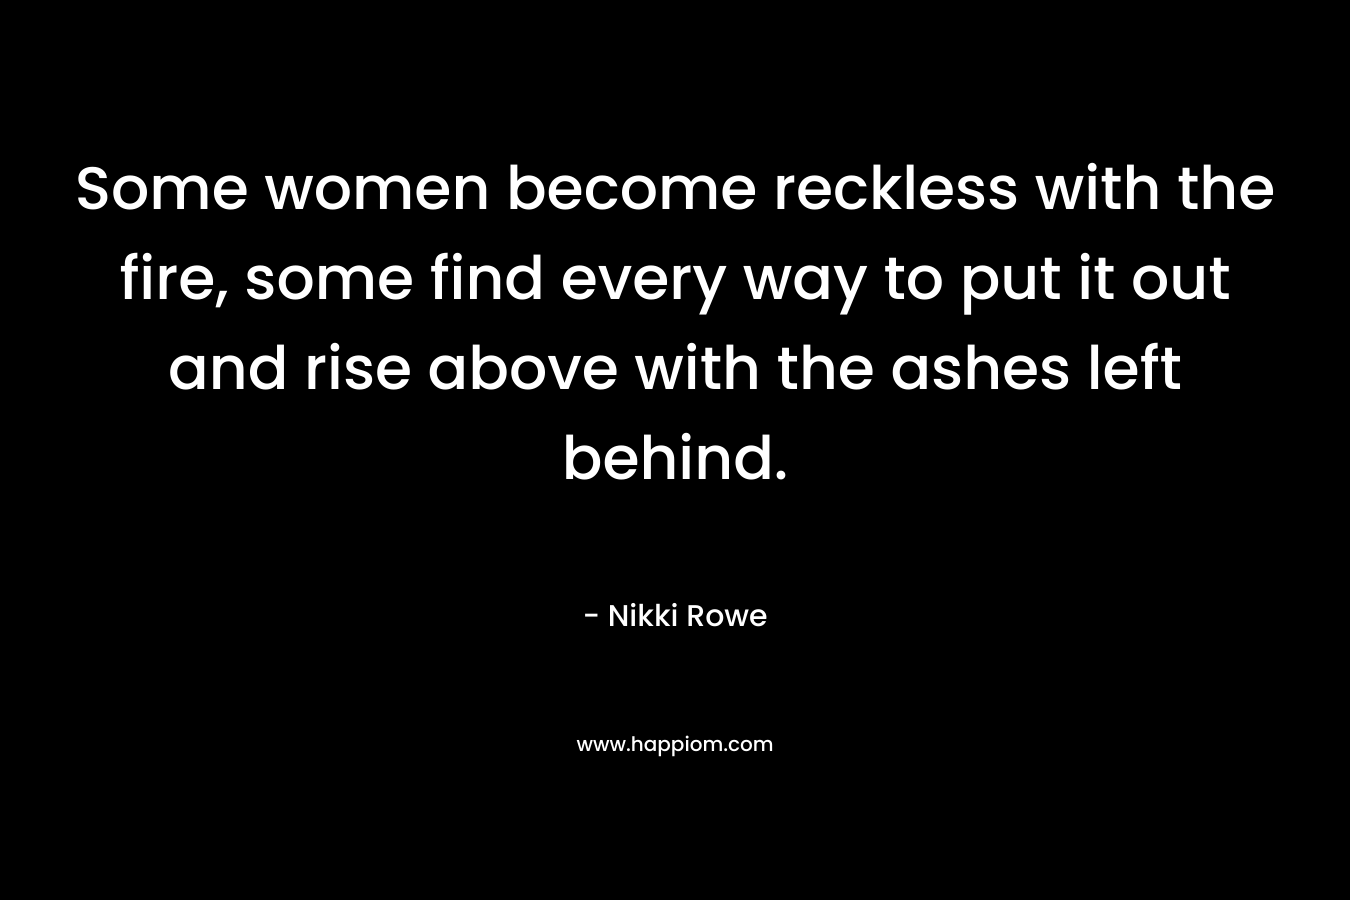 Some women become reckless with the fire, some find every way to put it out and rise above with the ashes left behind. – Nikki Rowe